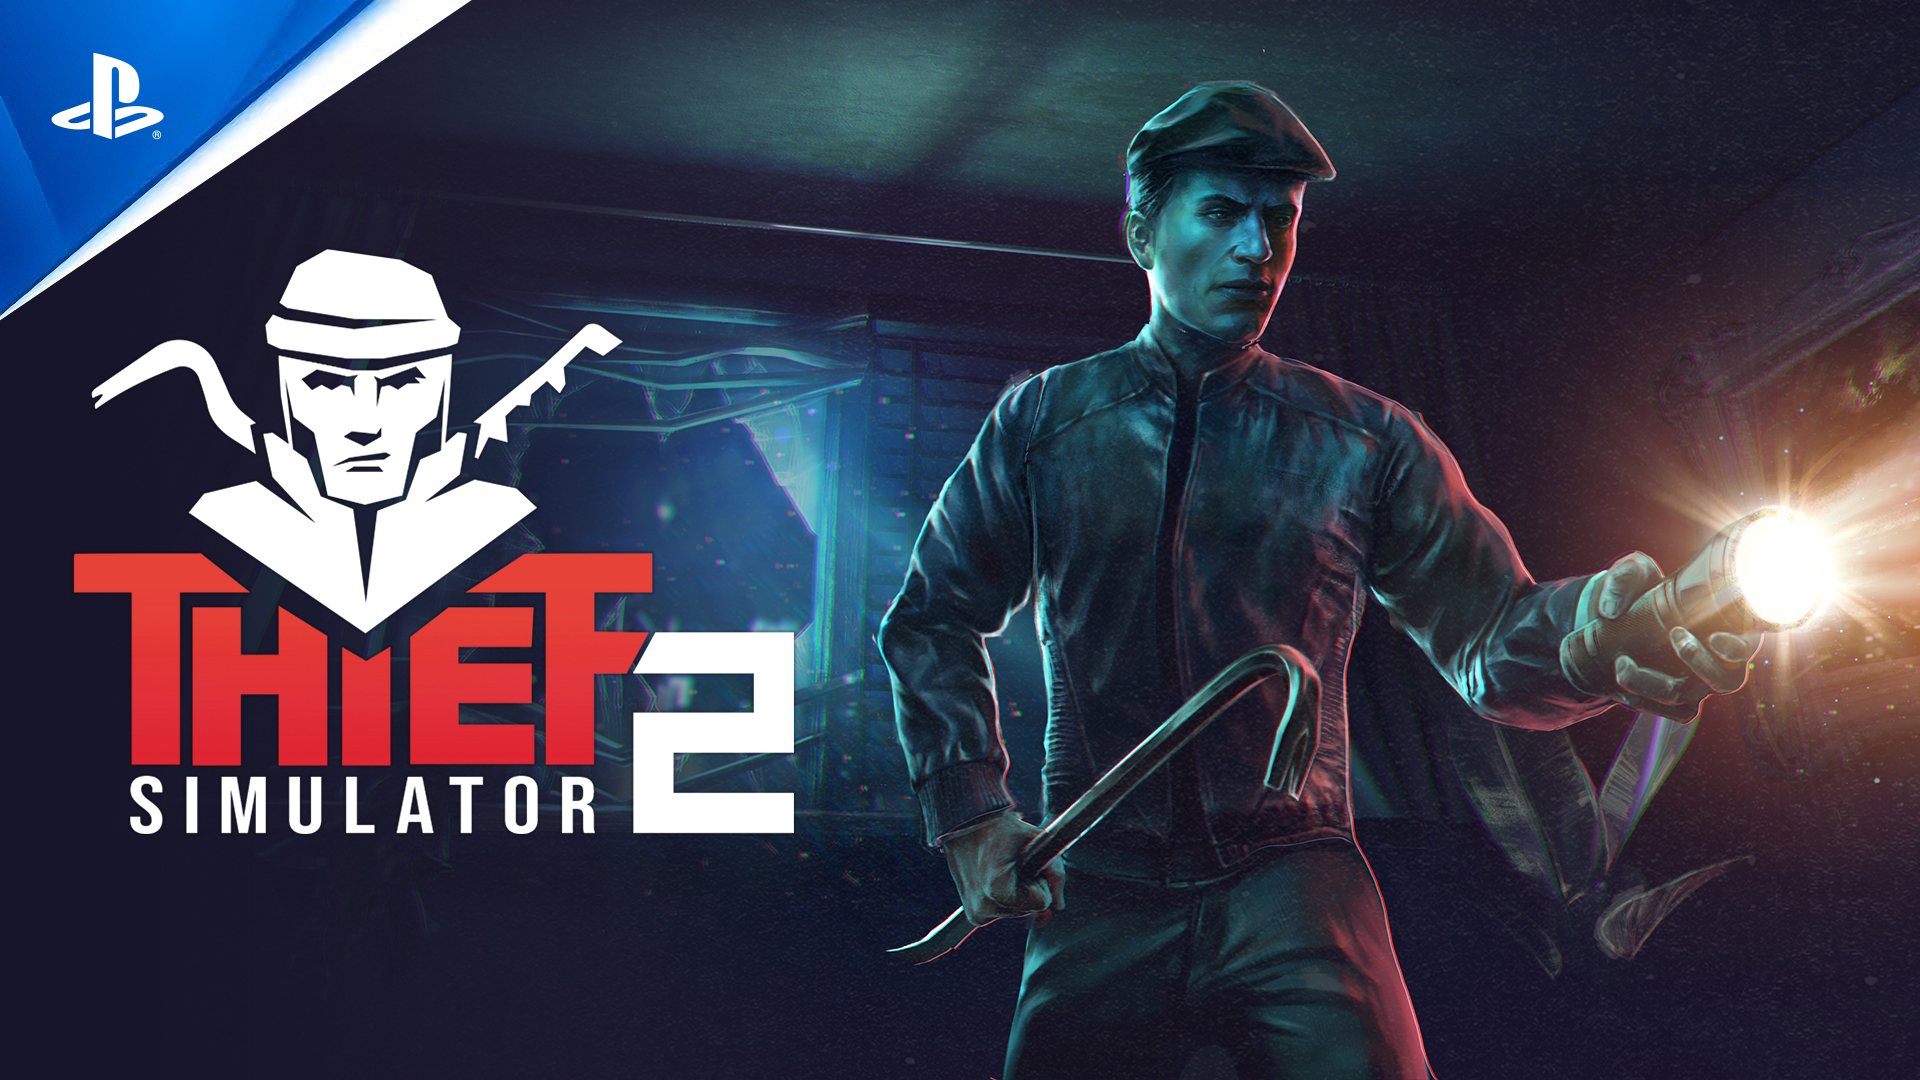 It's time to get rich in the mafia world: On 12 July, the stealth game Thief Simulator 2 was released on PlayStation 5